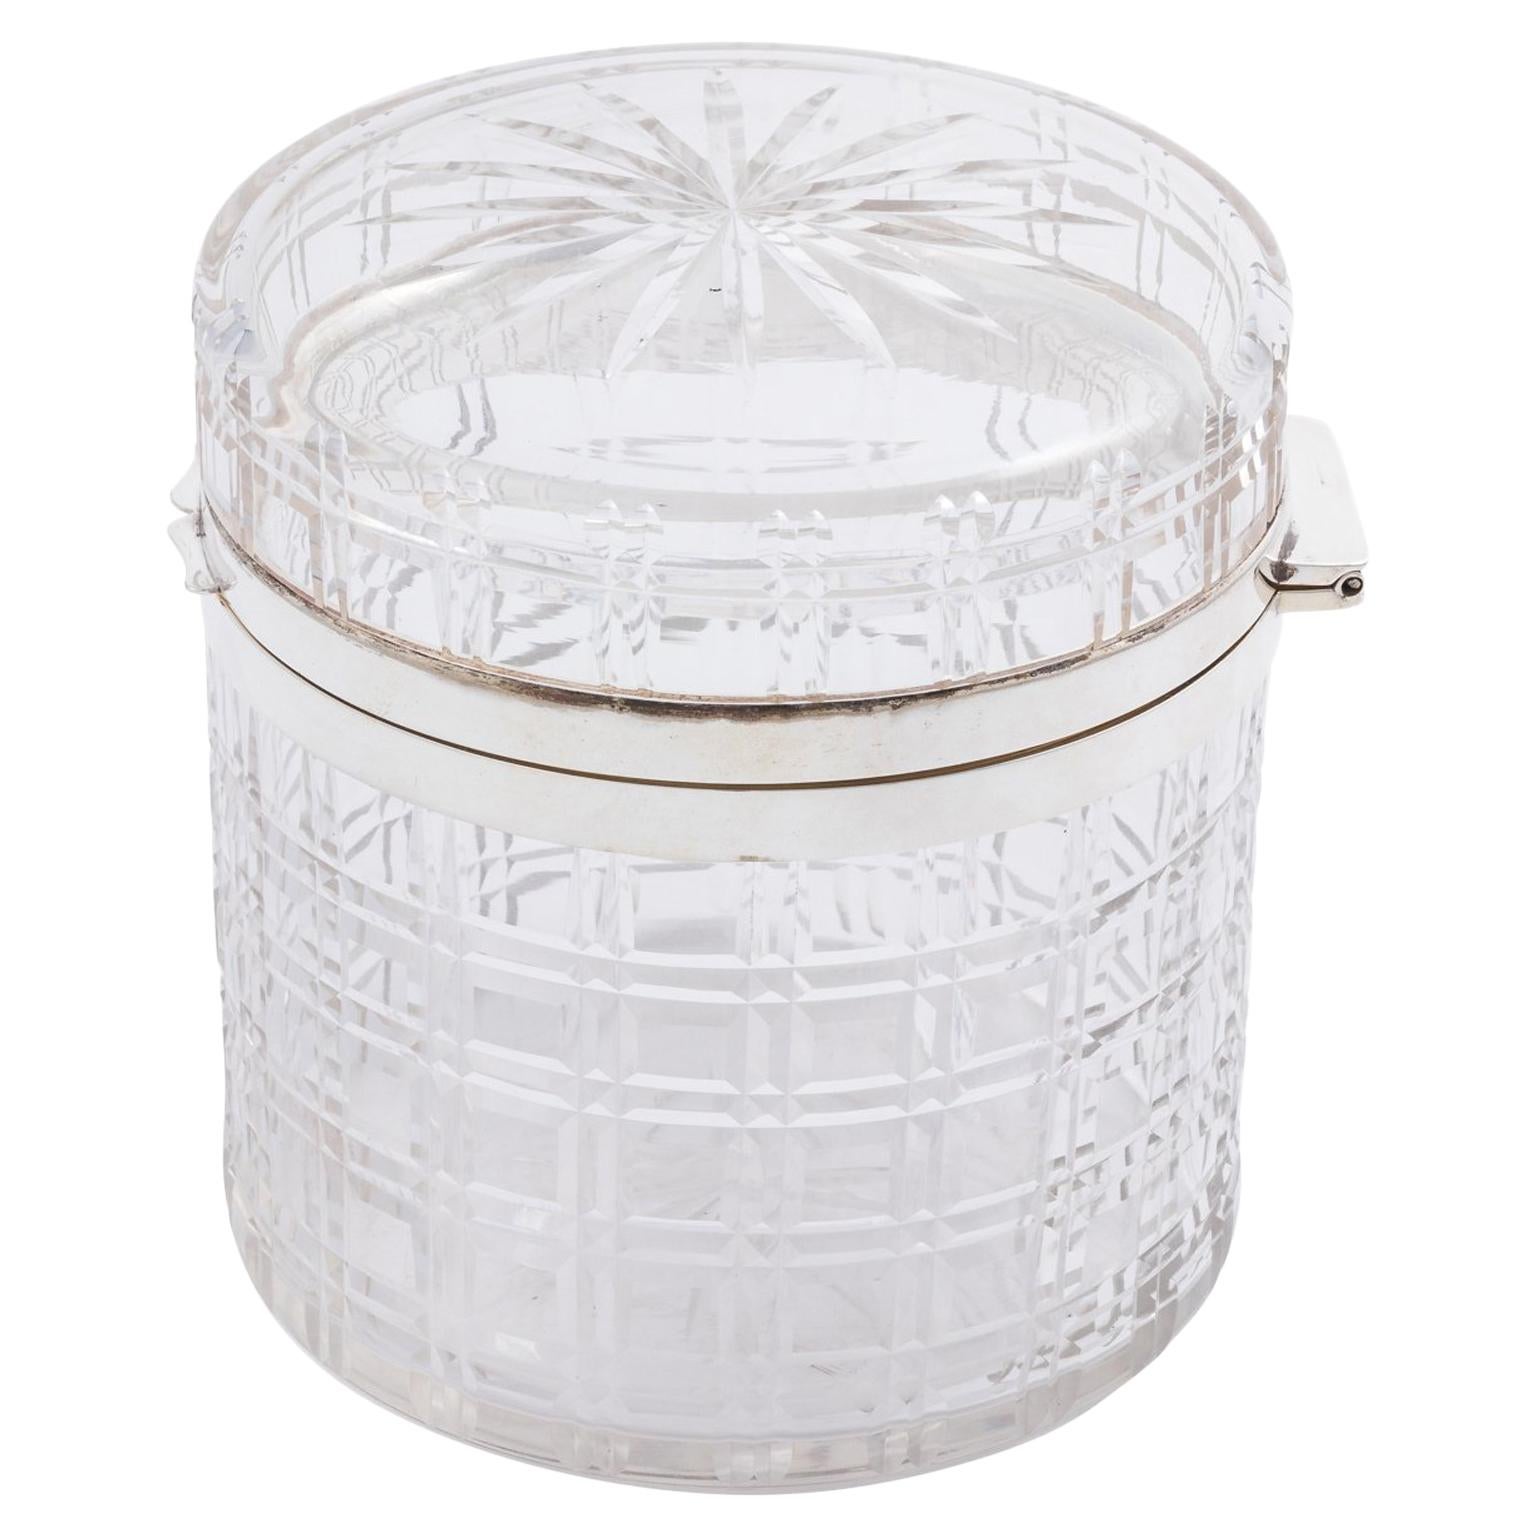 English Silver Plate Biscuit Jar, circa 1930s For Sale